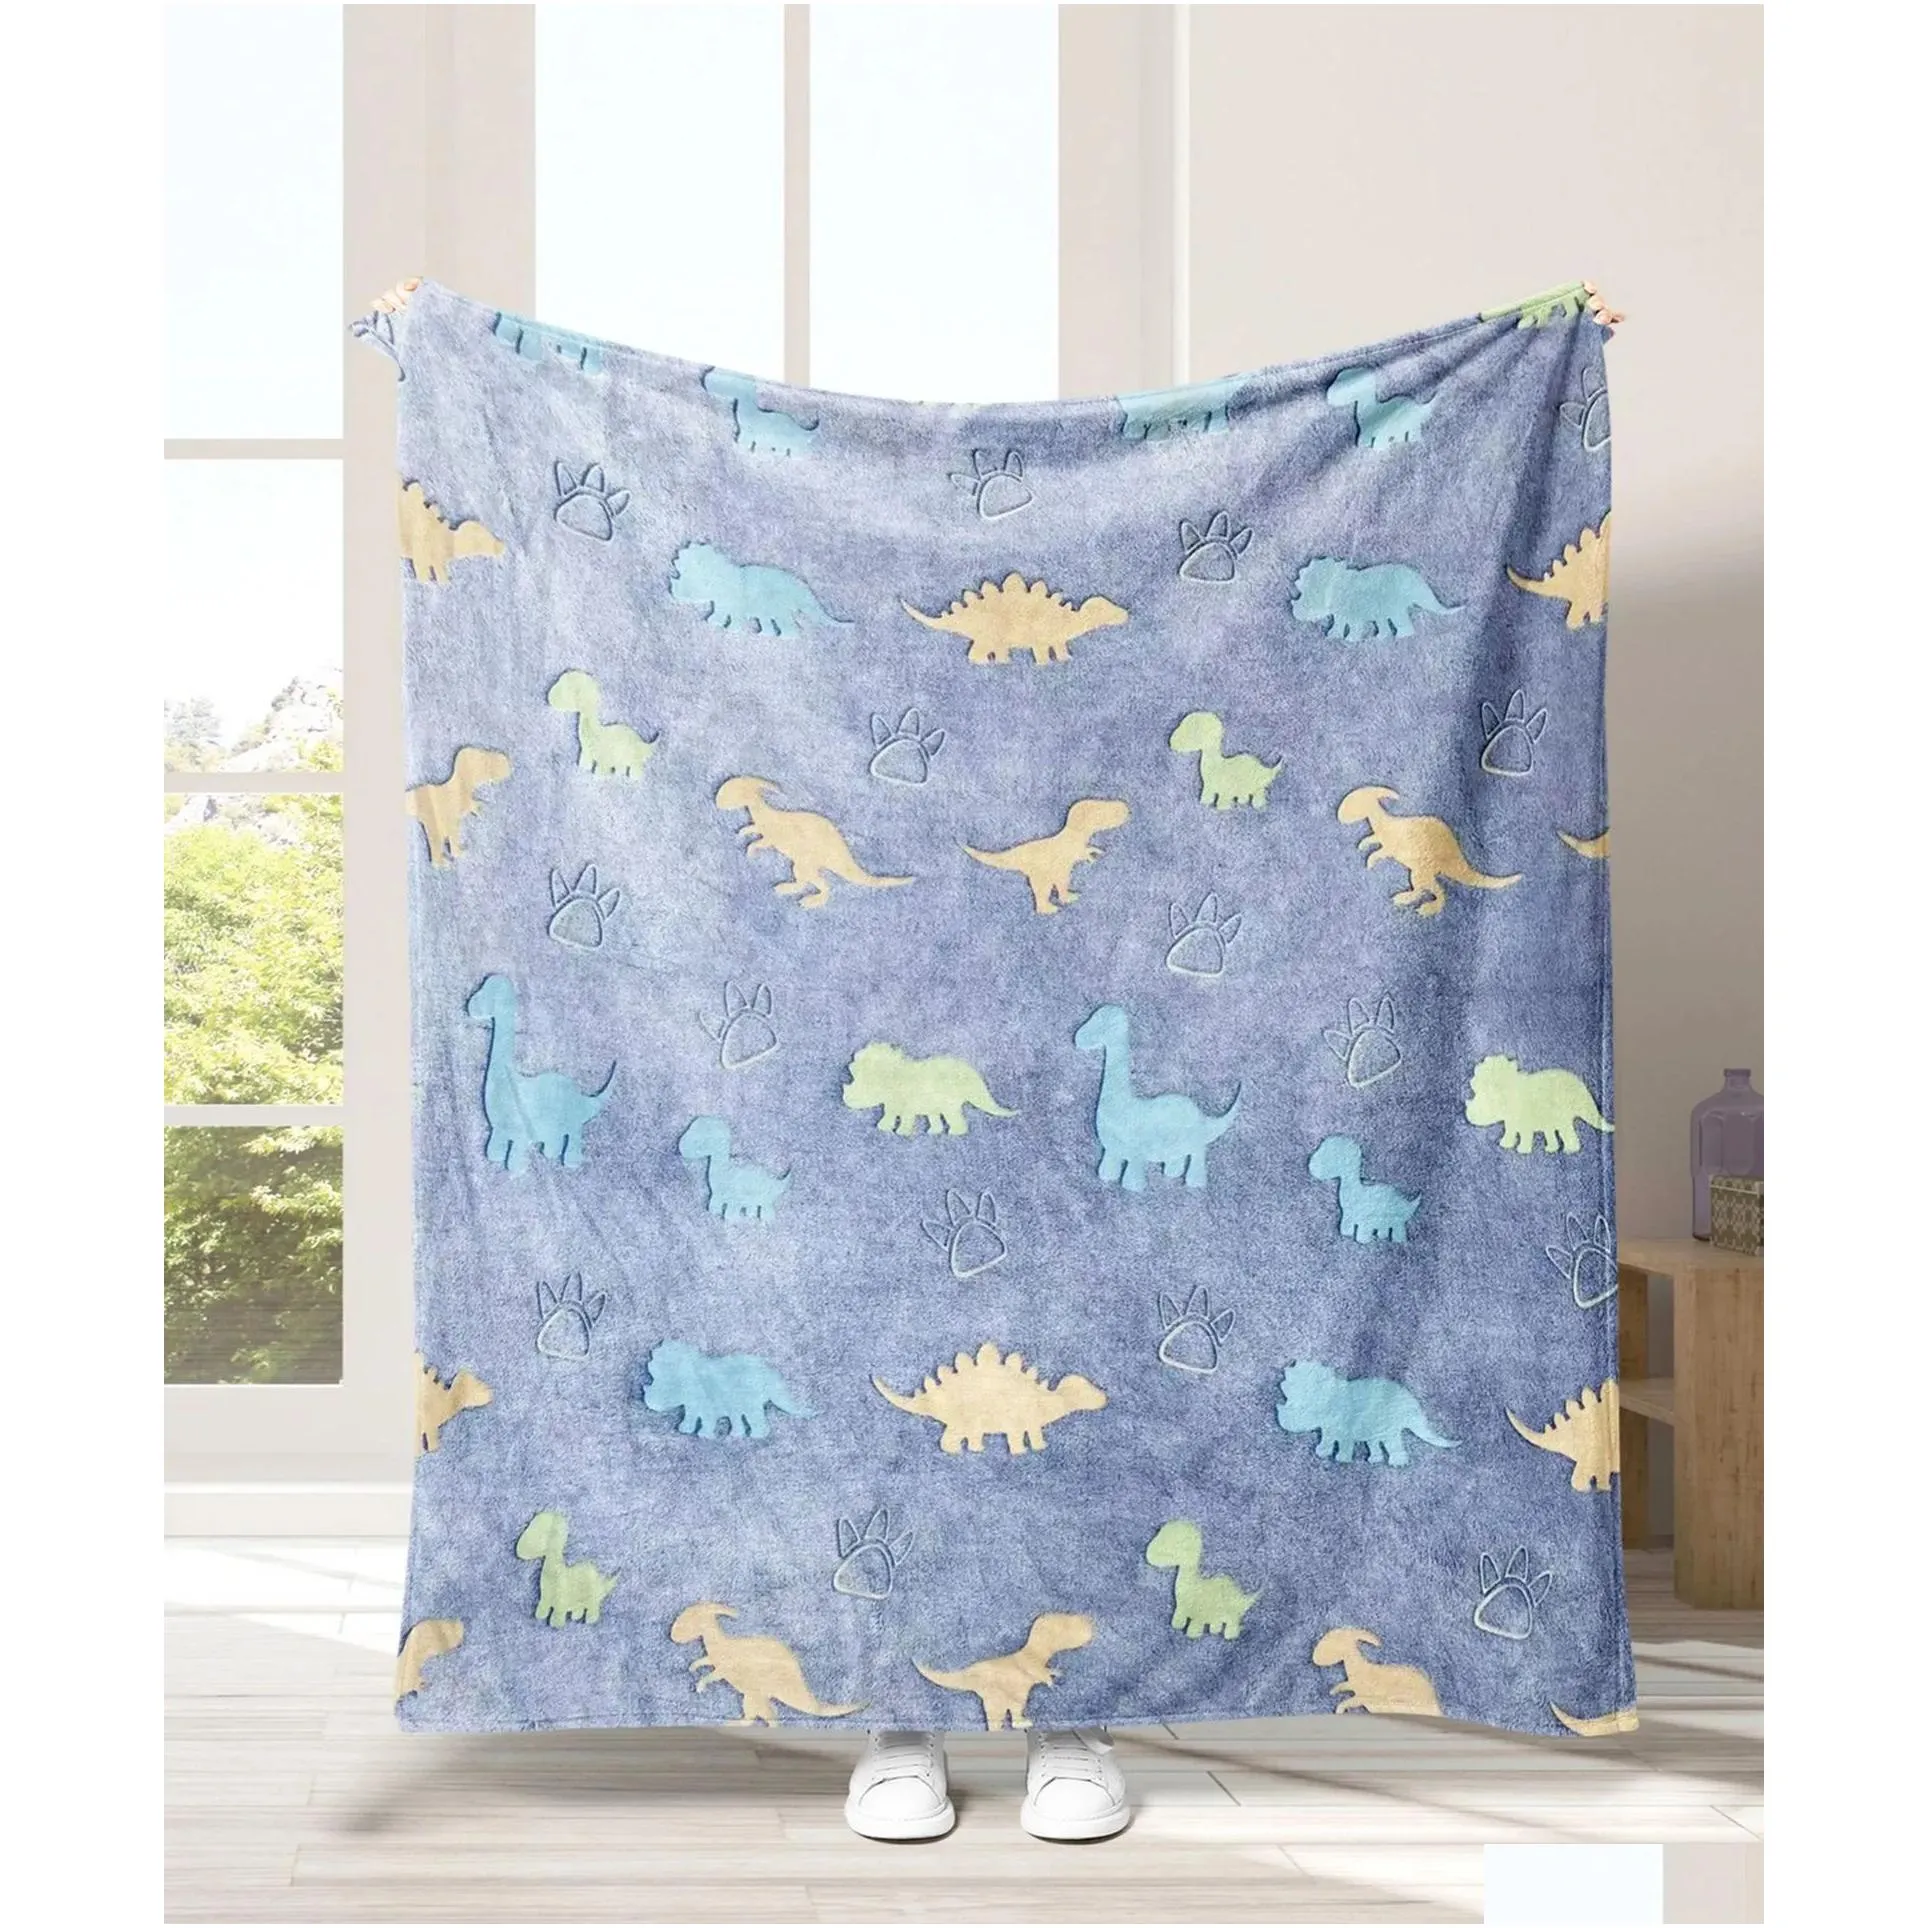 Blanket 1Pc Glow In The Dark P Throw Soft And Cozy Flannel For Bed Sofa Office Birthday Thanksgiving Gift Drop Delivery Dhy5U